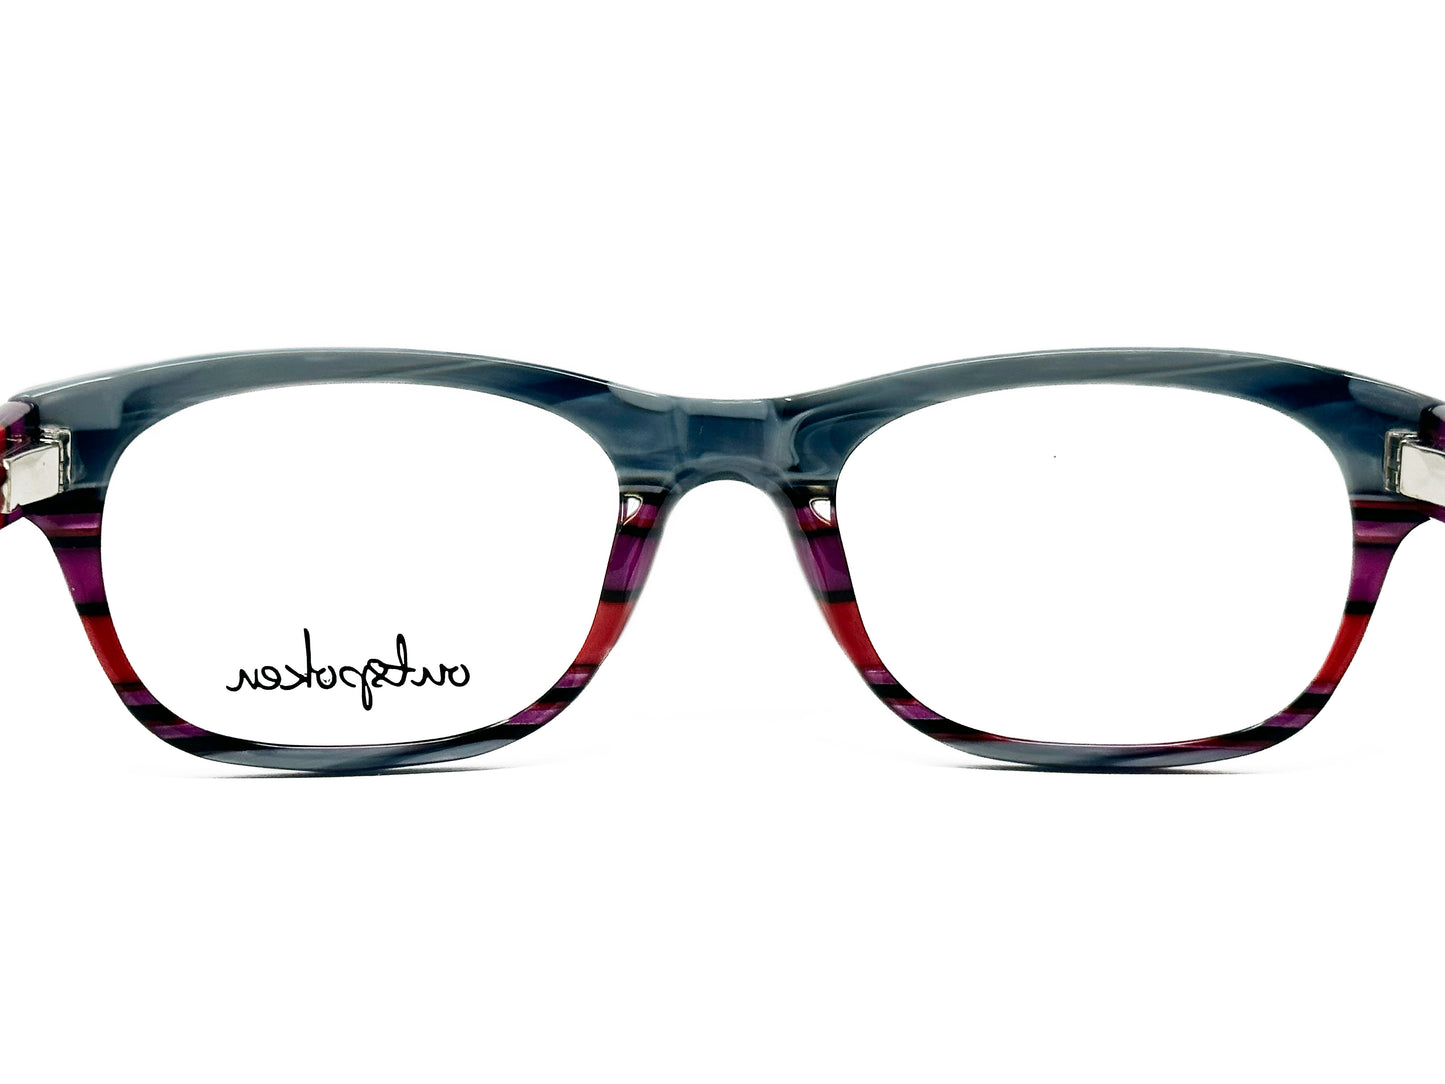 Outspoken rounded square, acetate optical frame. Model: A1213. Color: C1 - Black, red, and blue striped. Inside view.